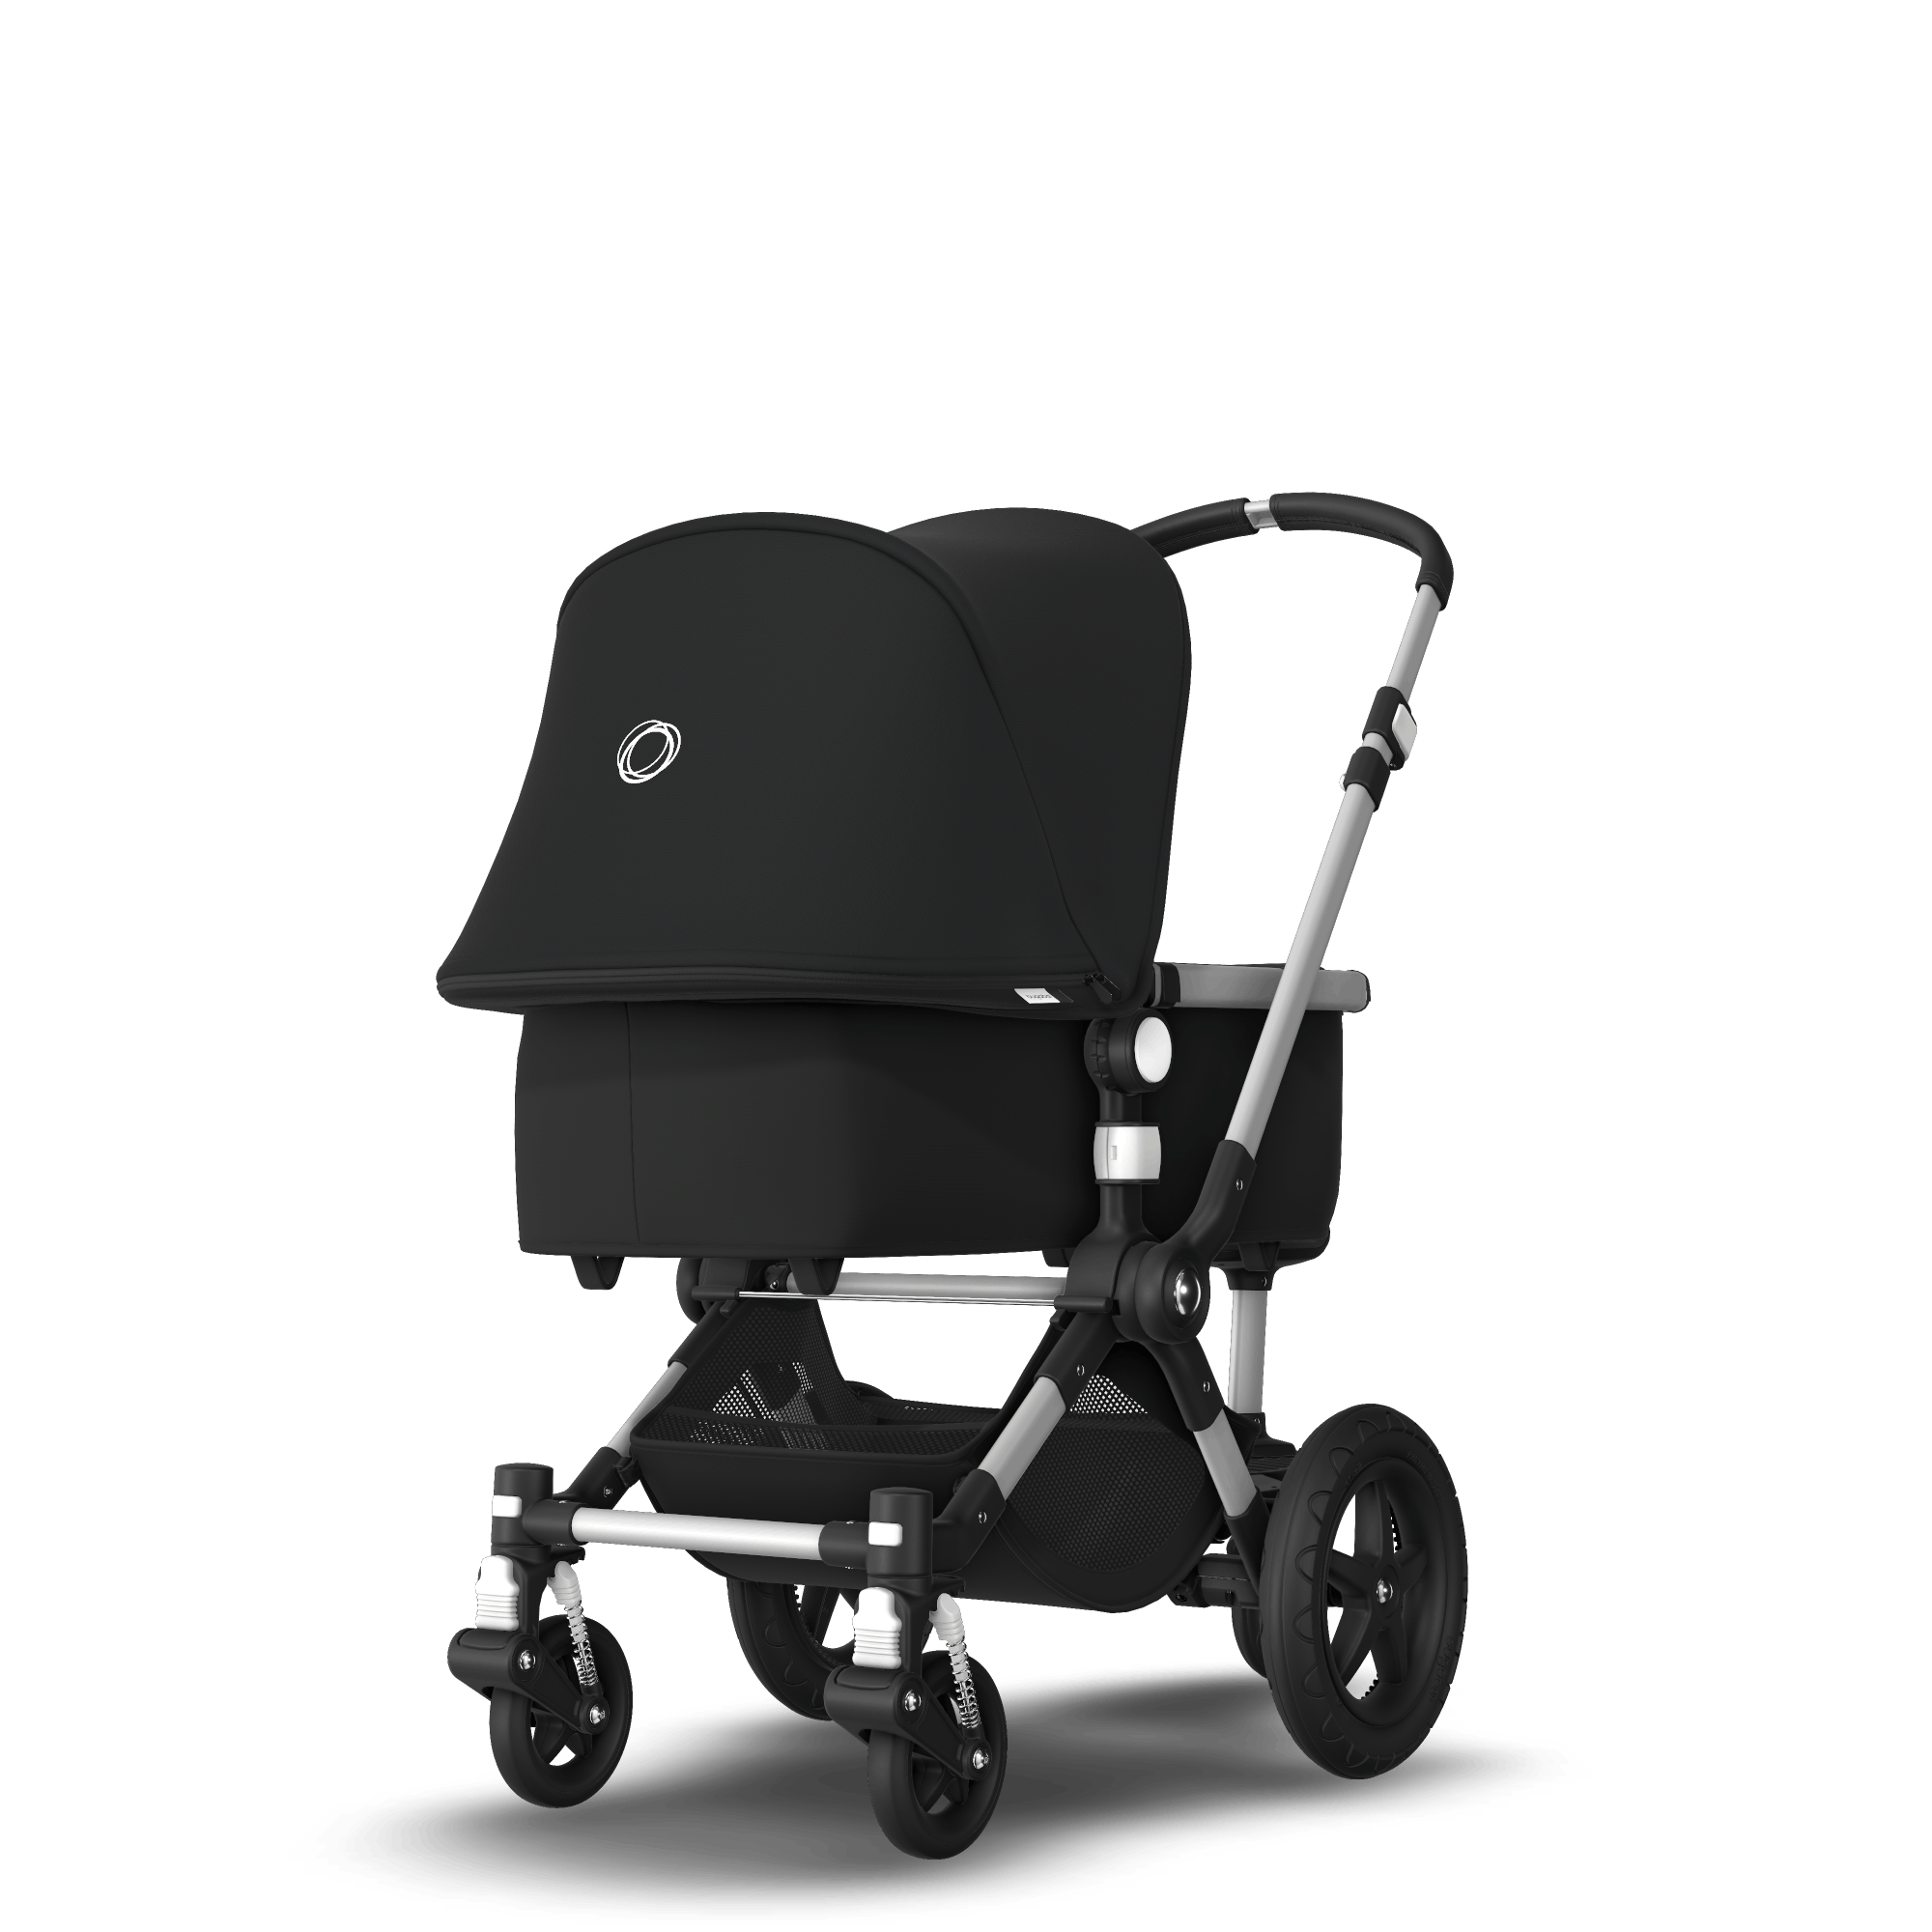 sit and stand stroller parts